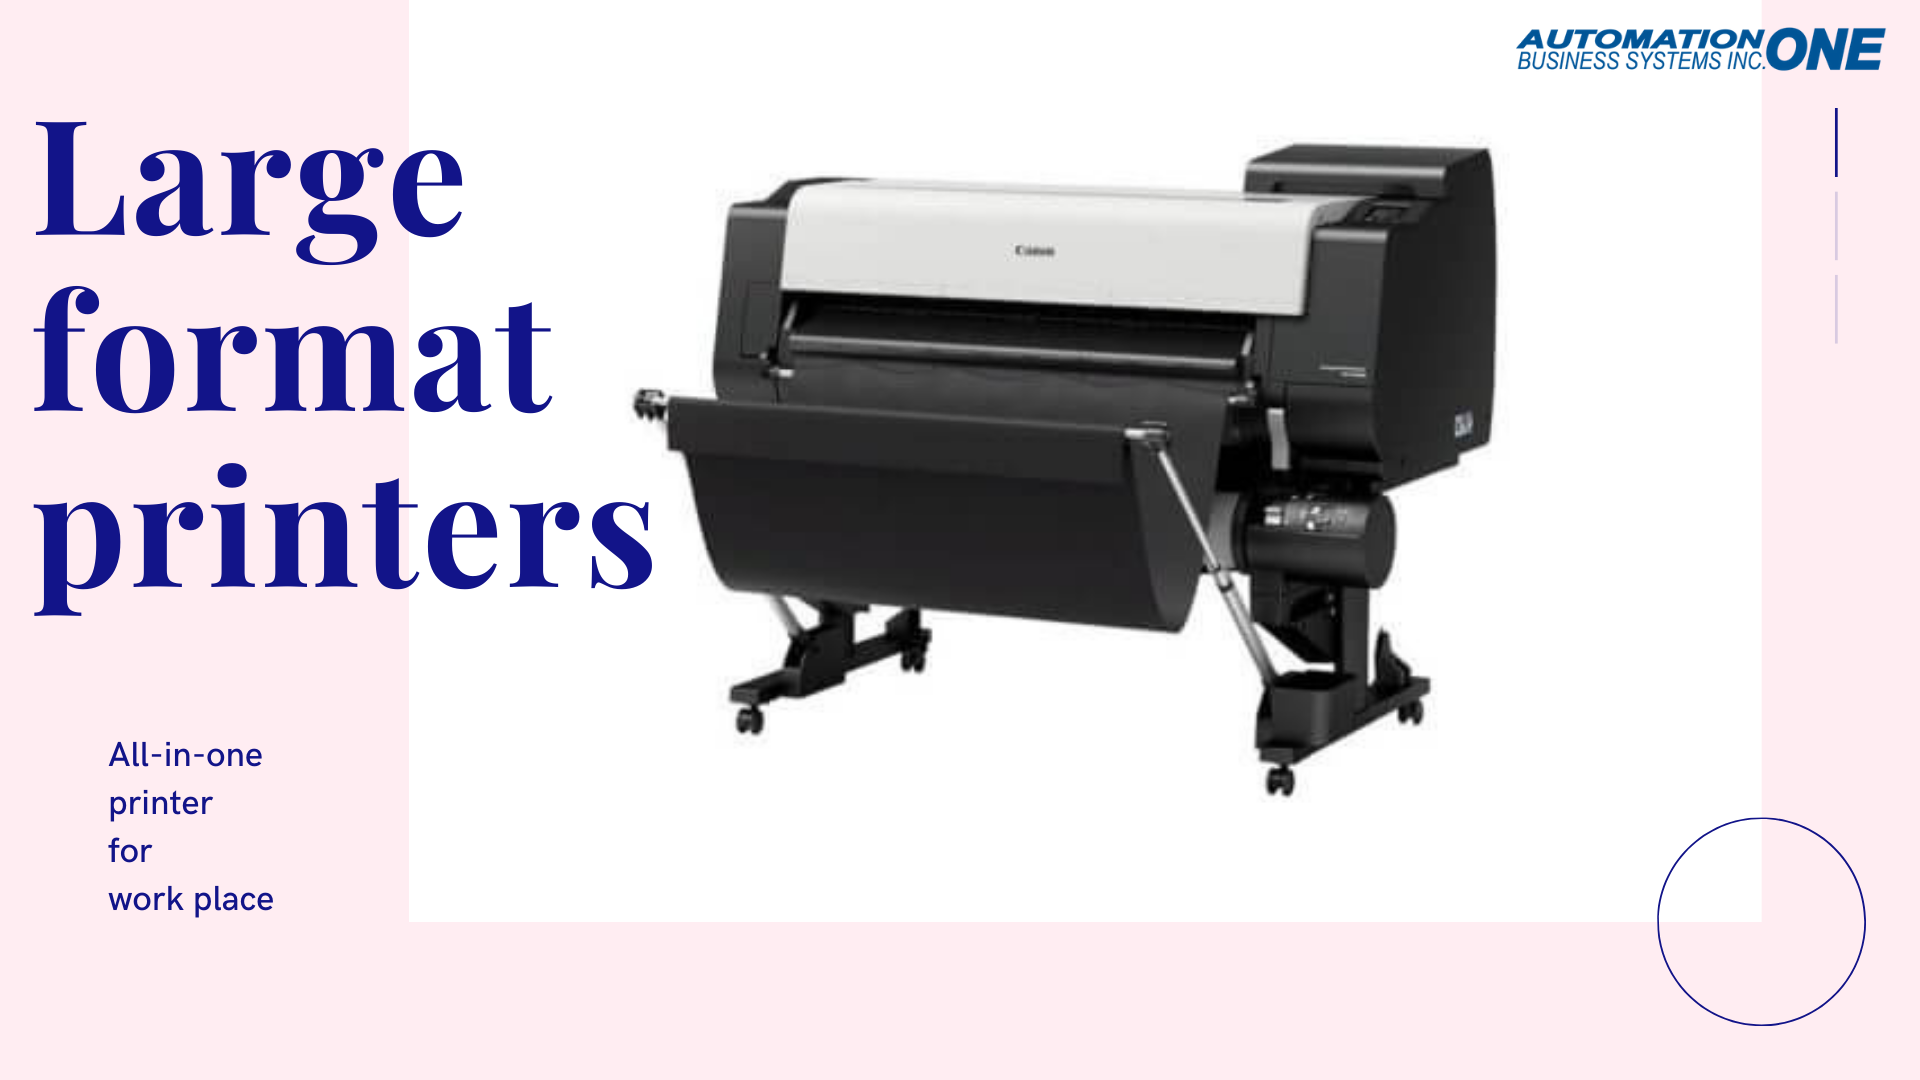 How to choose the best all-in-one printer for the workplace